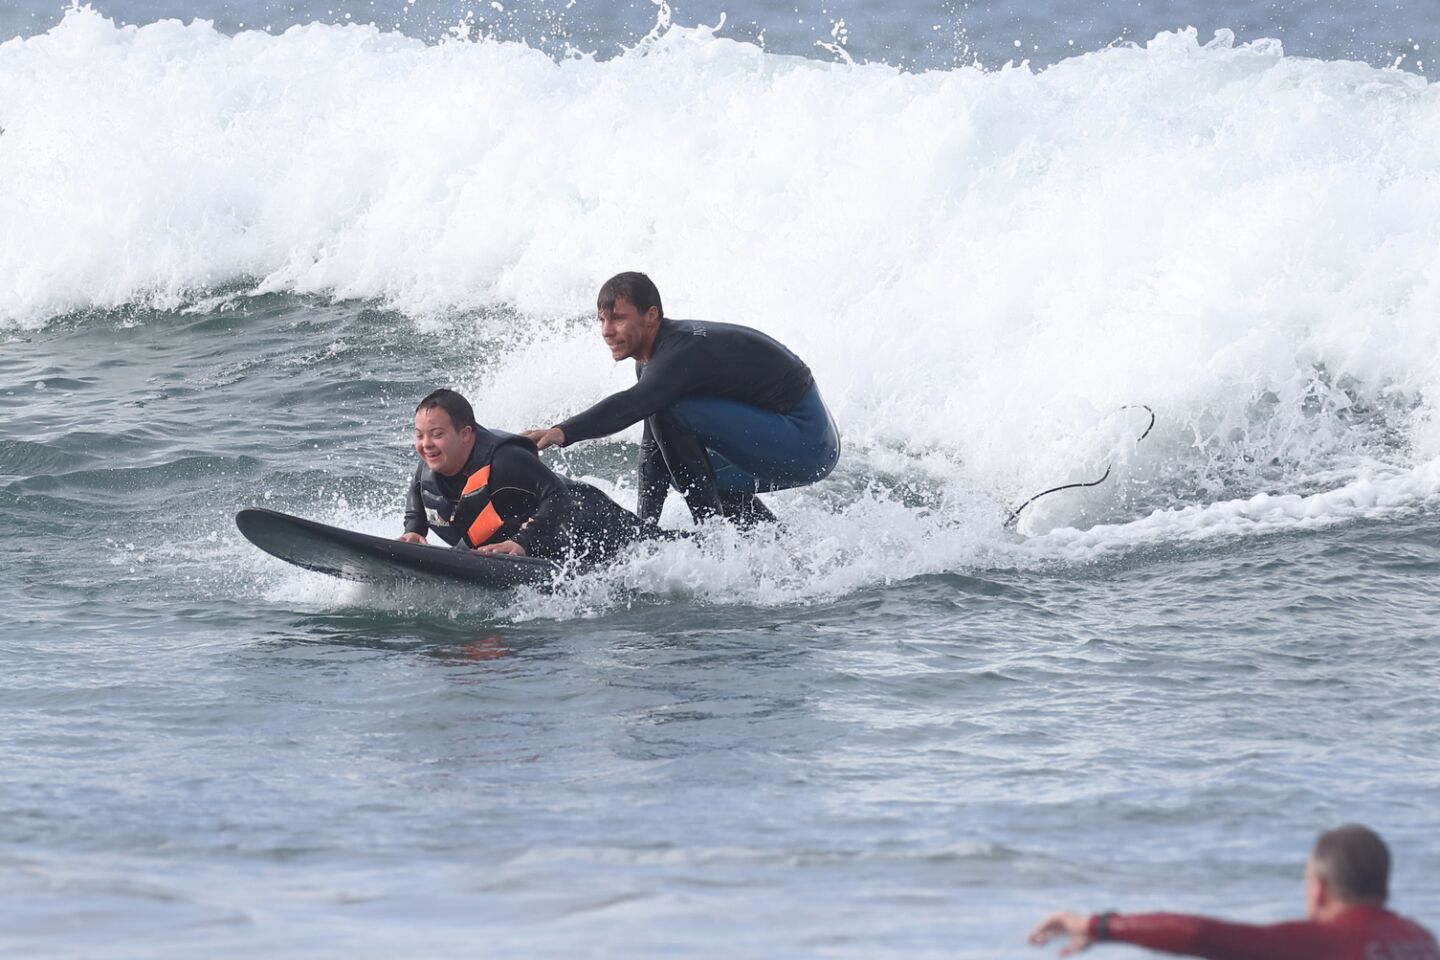 Students and instructors had a great day on the waves